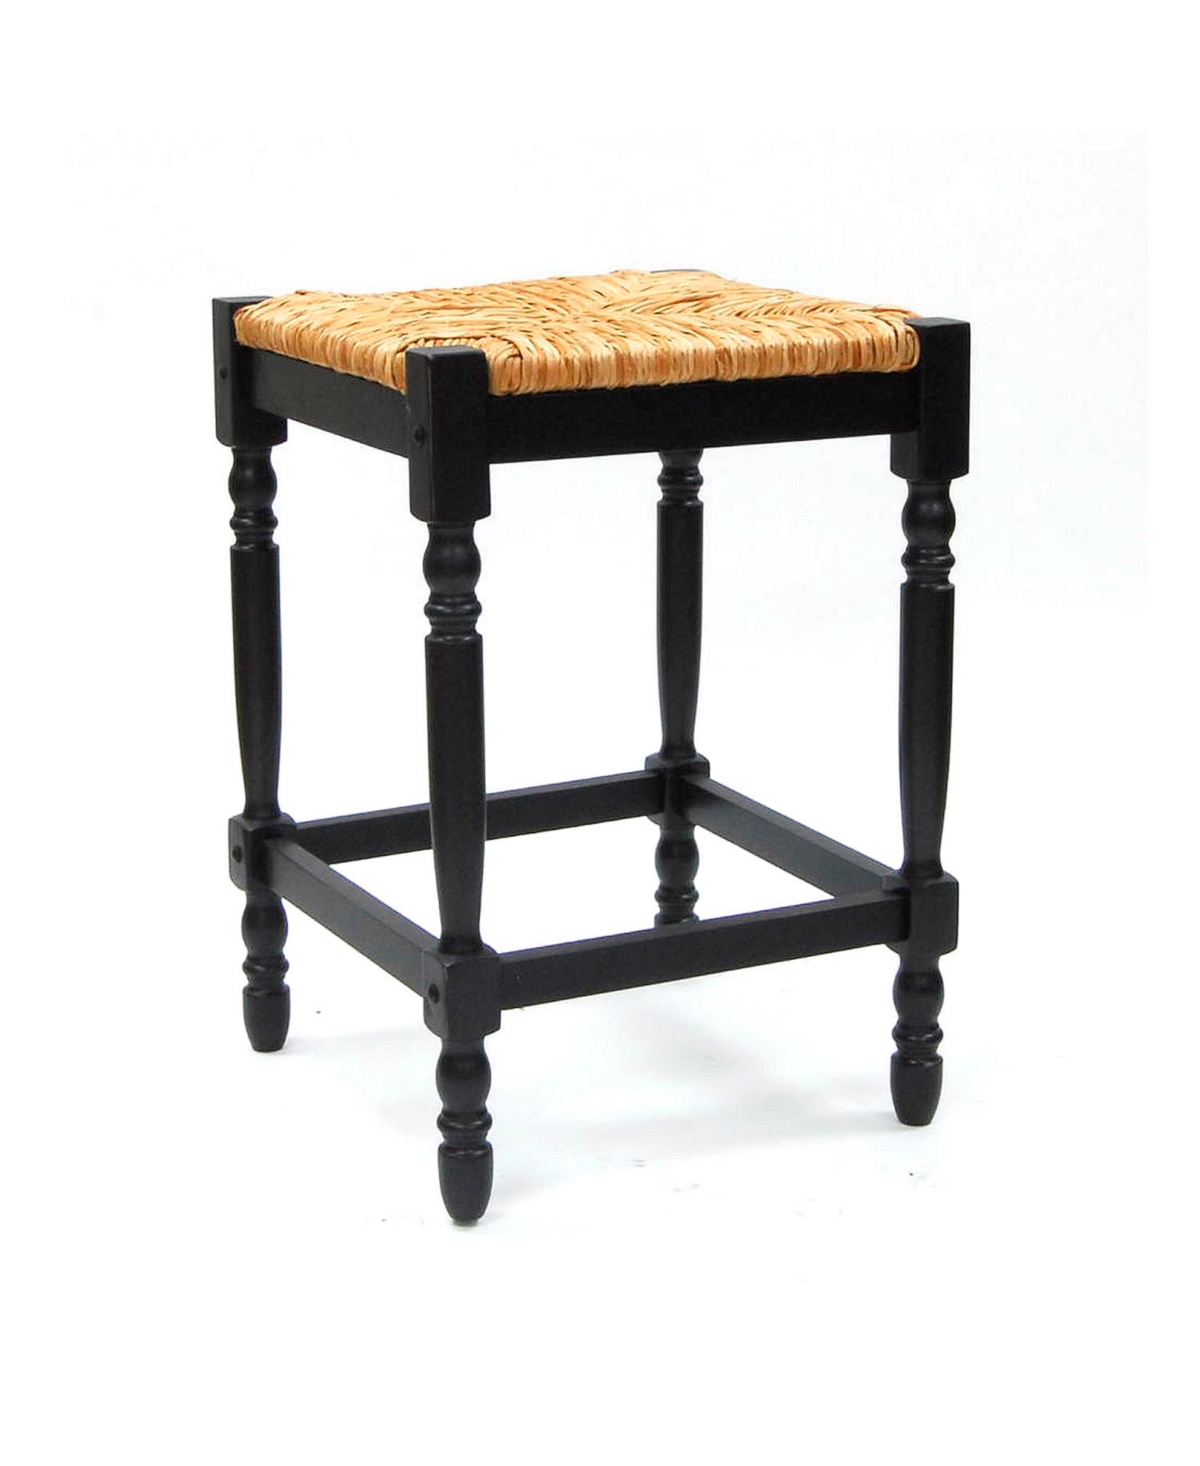 10166273 French Country 24 Turned Leg Seat Stool sku 10166273